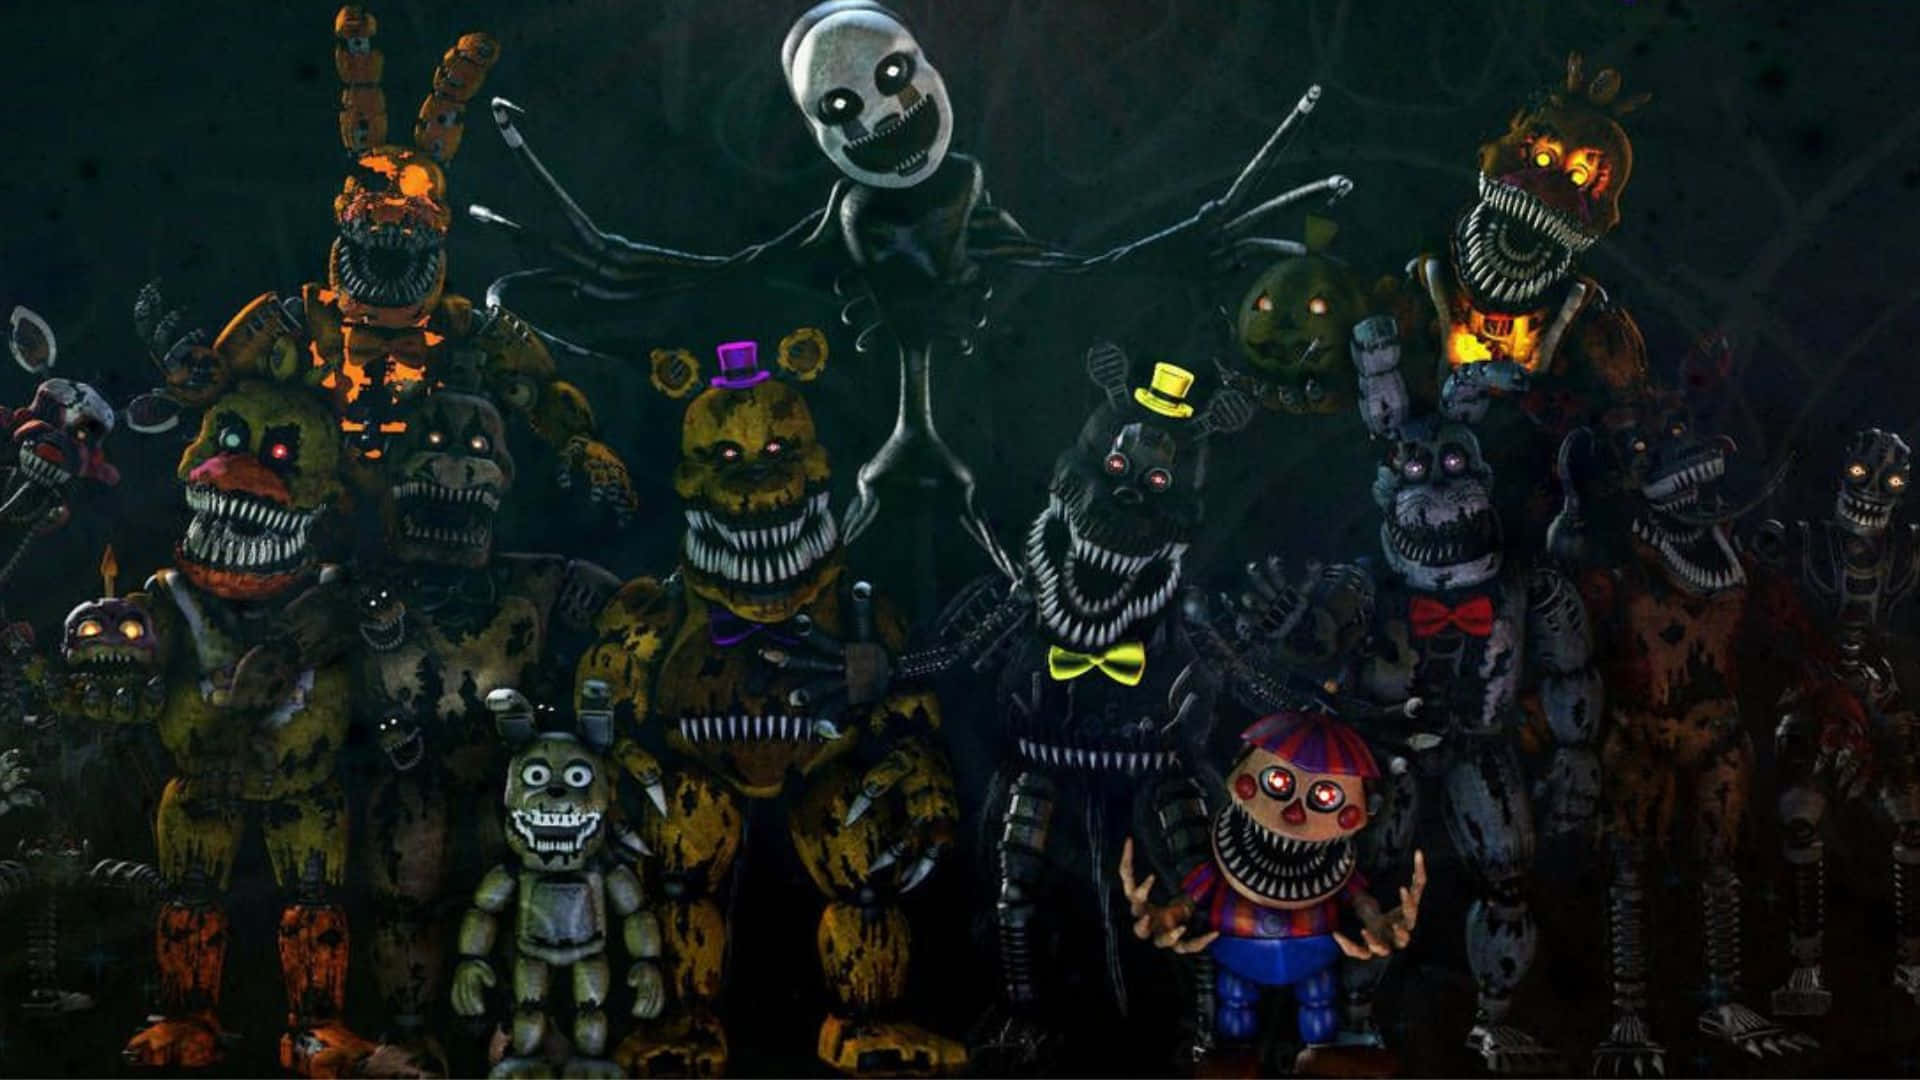 Frightening Five Nights at Freddy's Characters Wallpaper